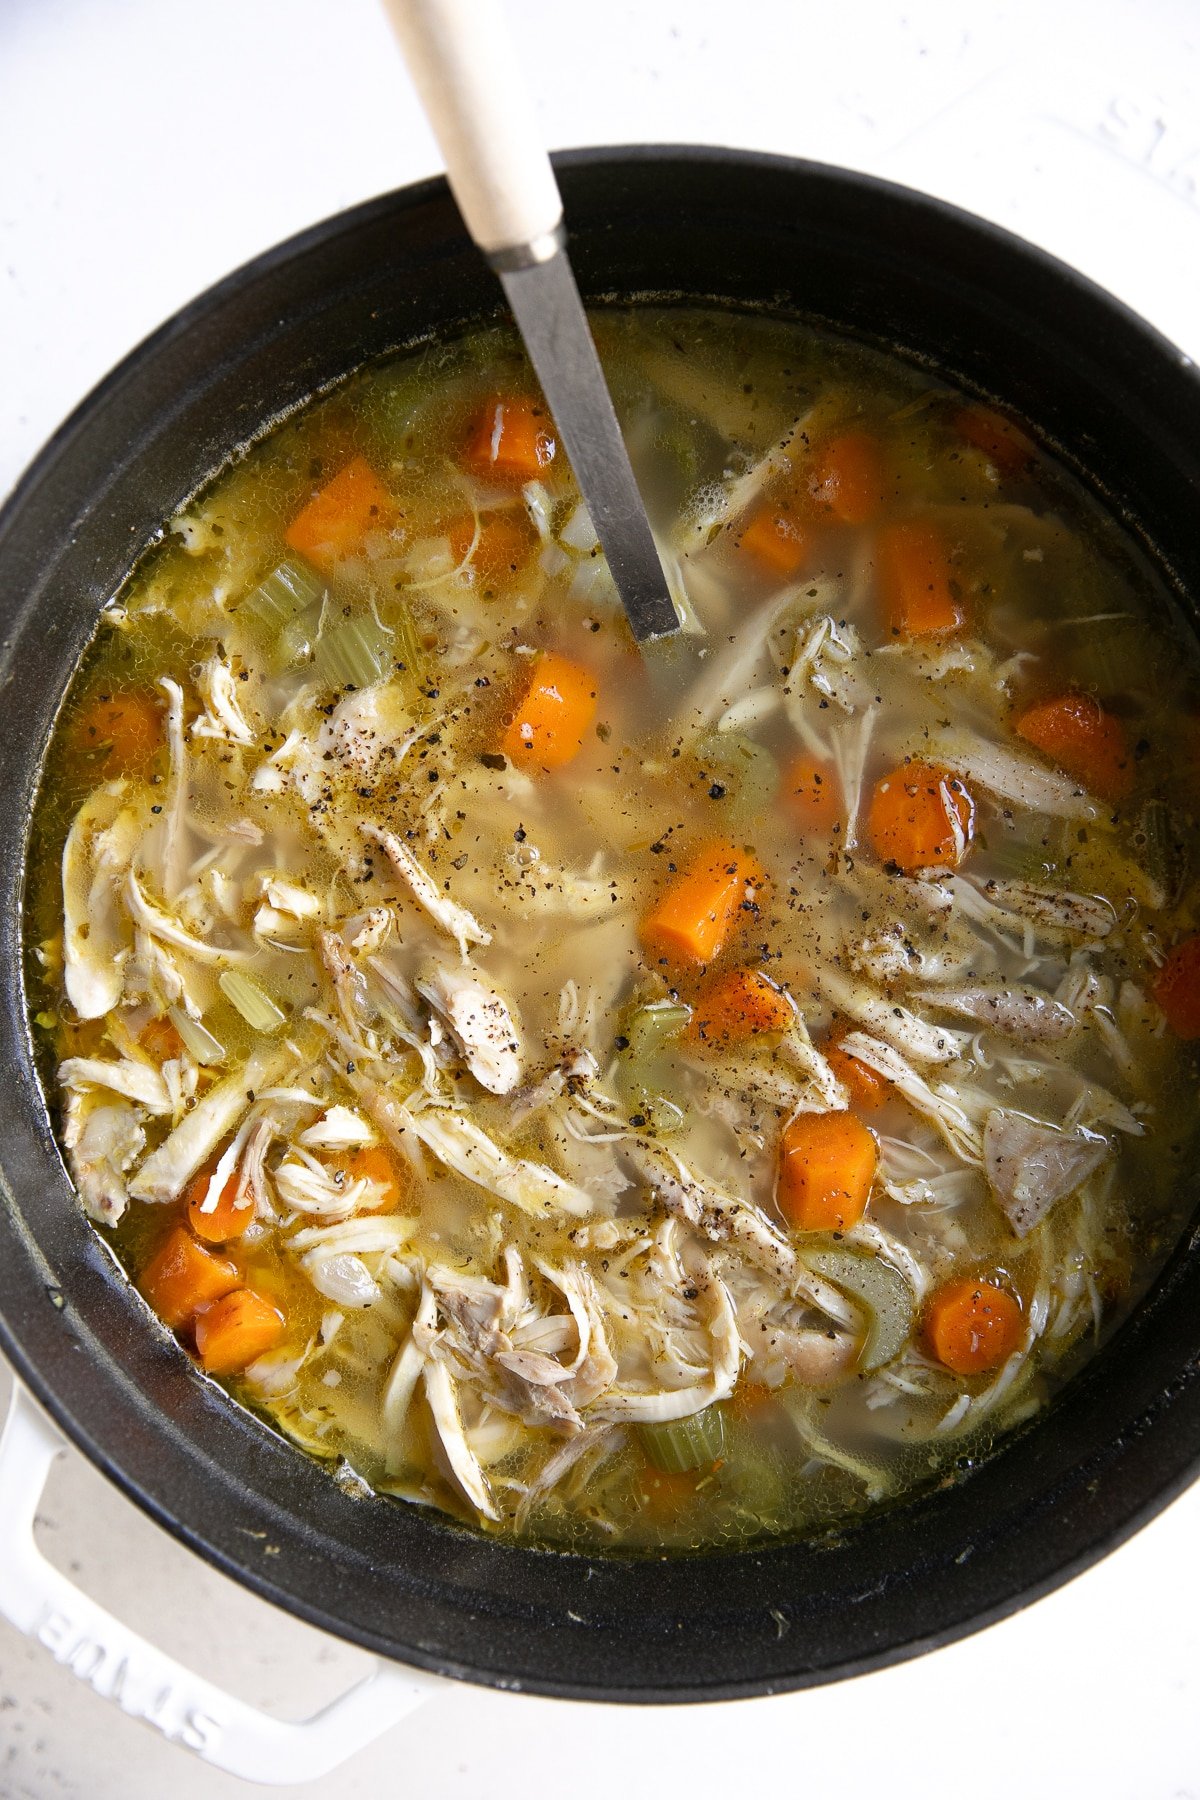 Large white pot filled with homemade chicken soup recipe made with chicken, carrots, celery, and broth.